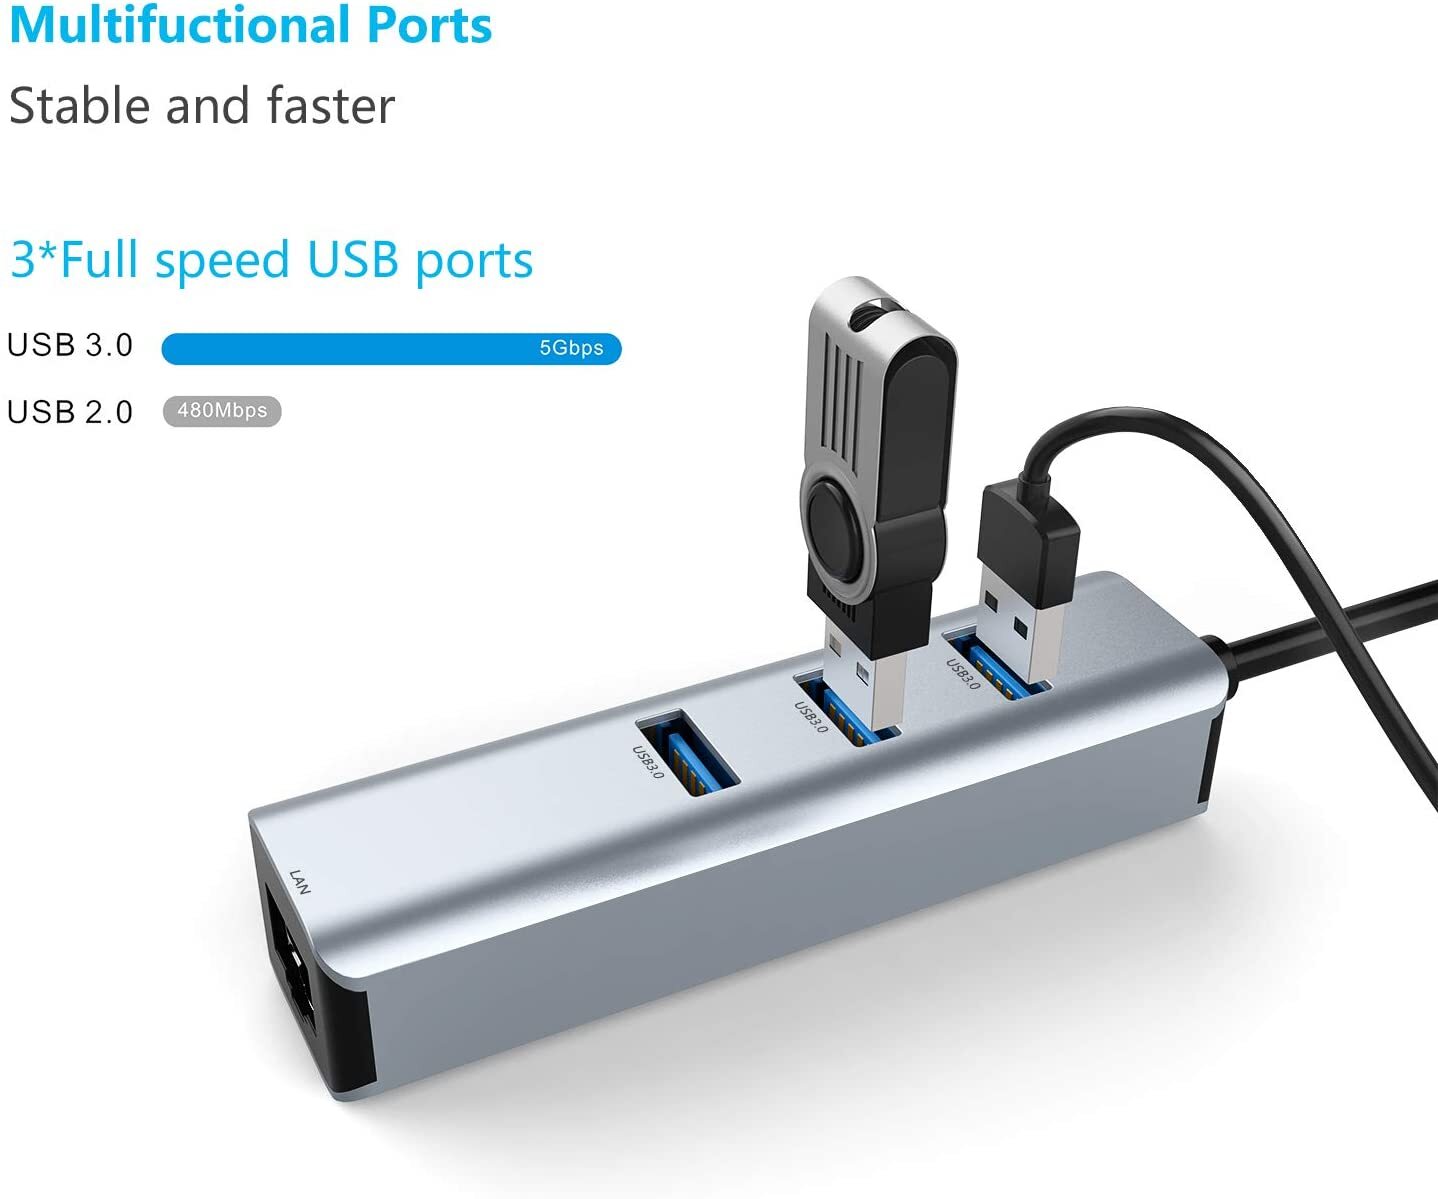 USB 3.0 to Ethernet Adapter,3-Port USB 3.0 Hub with RJ45 10/100/1000  Gigabit Ethernet Adapter Support Windows 10,8.1,Mac OS, Surface  Pro,Linux,Chromebook and More 